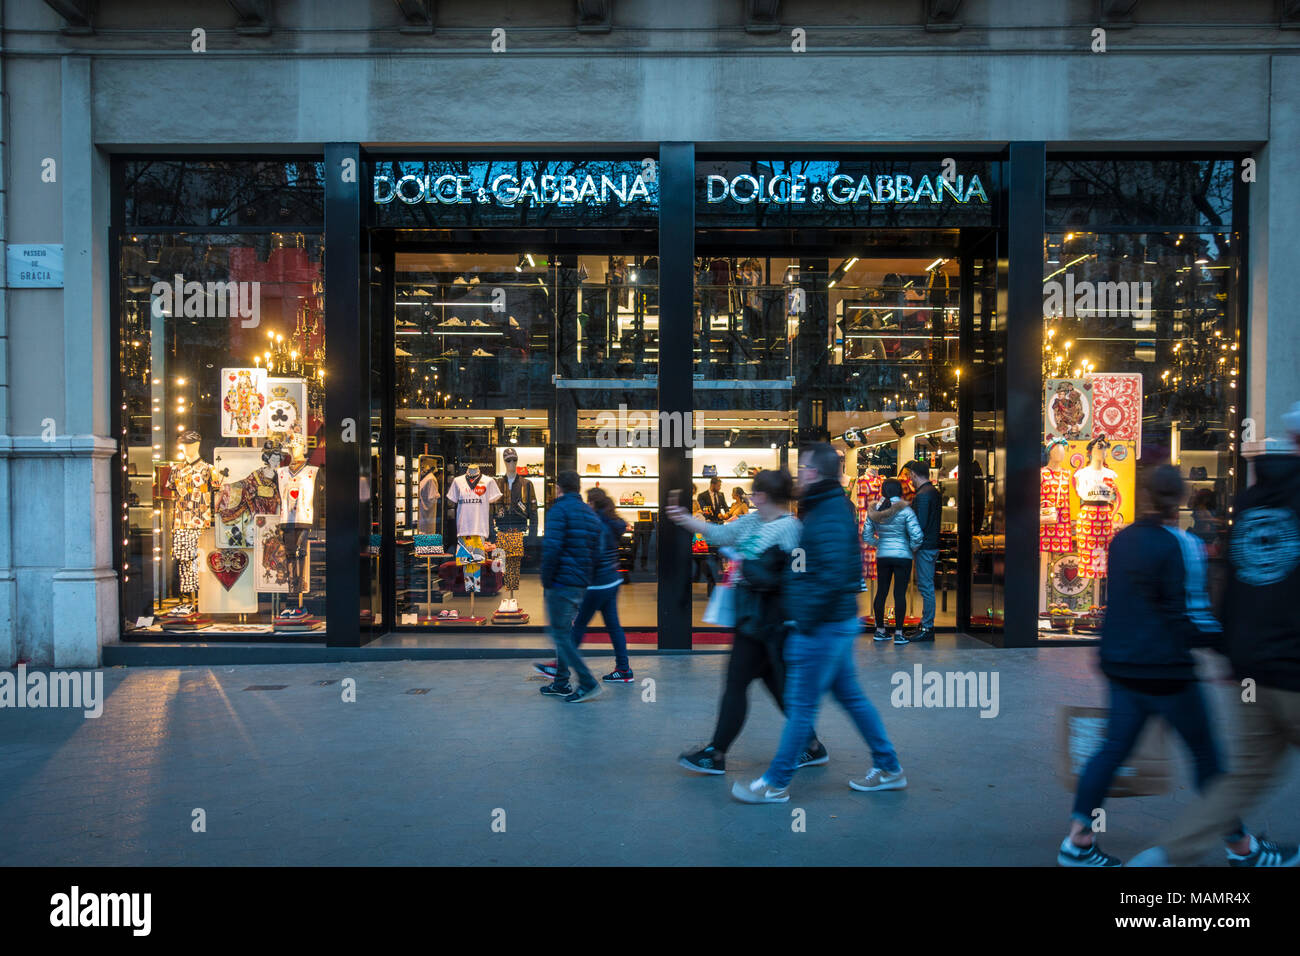 Barcelona, Spain. March 2018: People walking in front of Dolce Gabbana shop  Stock Photo - Alamy